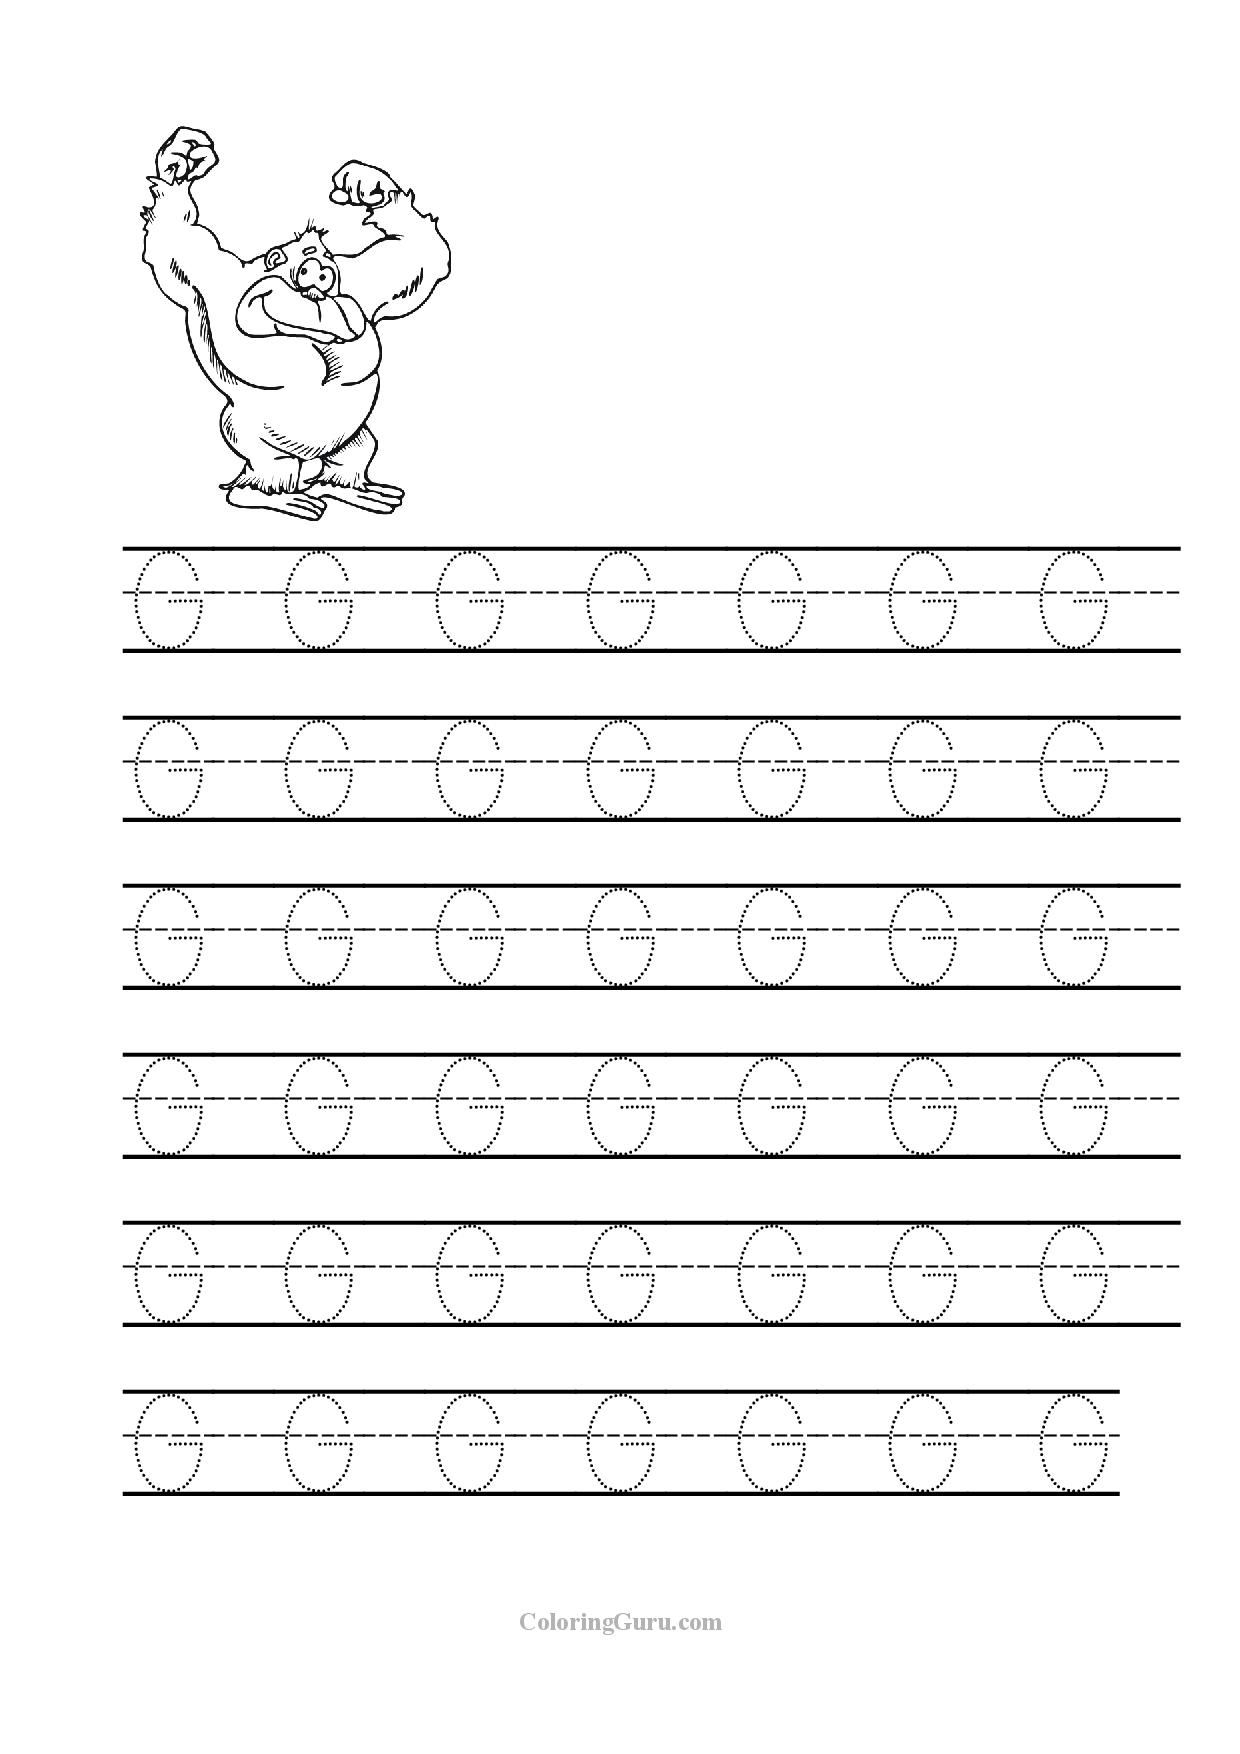 Free Printable Tracing Letter G Worksheets For Preschool for Letter G Tracing Worksheets Preschool